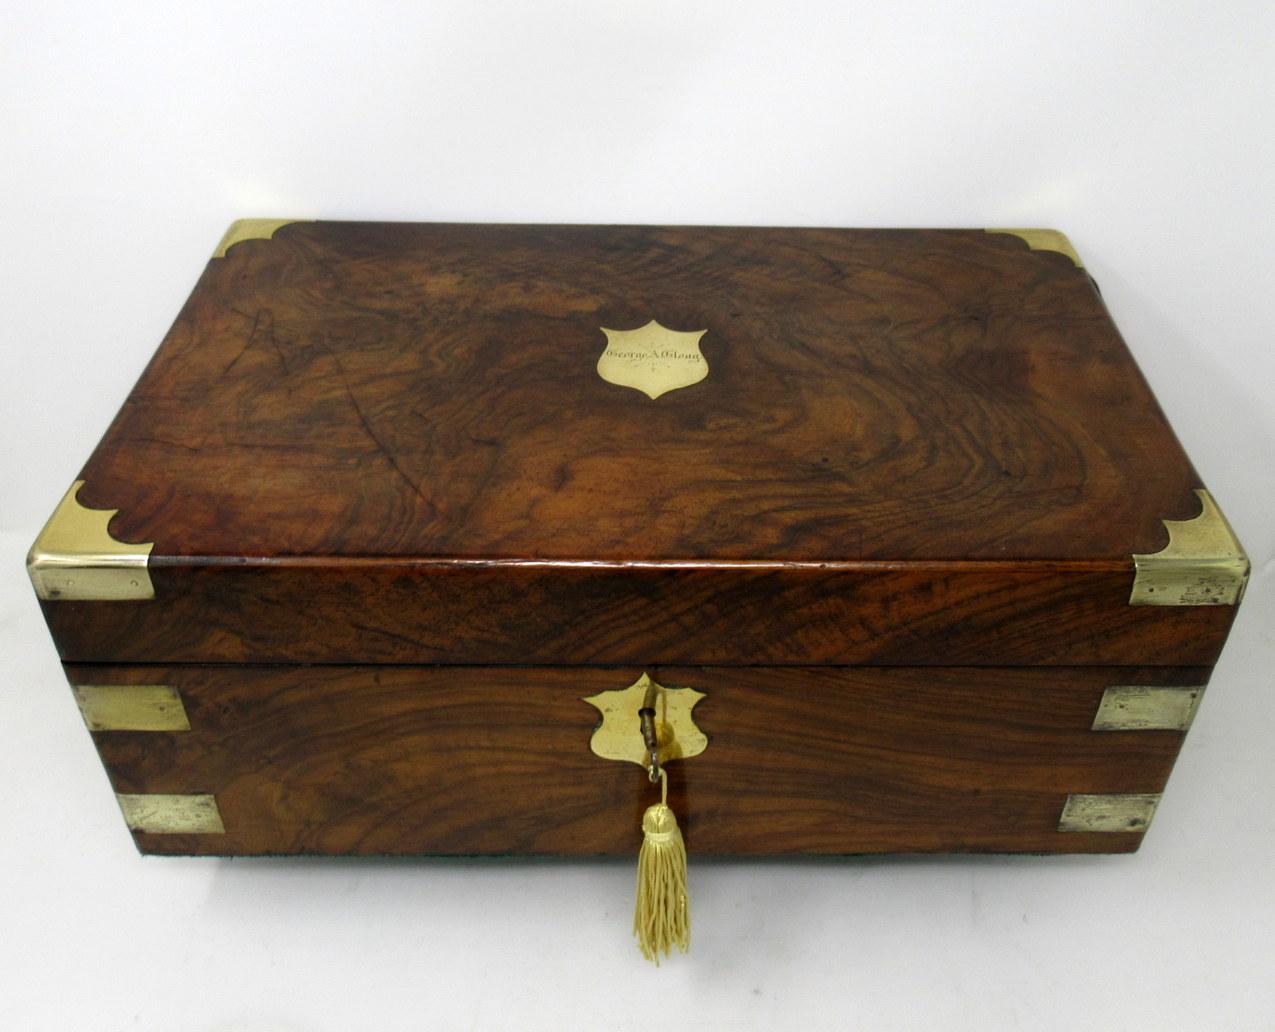 An exceptionally fine quality Irish well figured solid burr walnut ladies or gents travelling writing slope of outstanding quality and large proportions, with unusual moulded brass inlay decoration and central shield shaped brass tablet on hinged